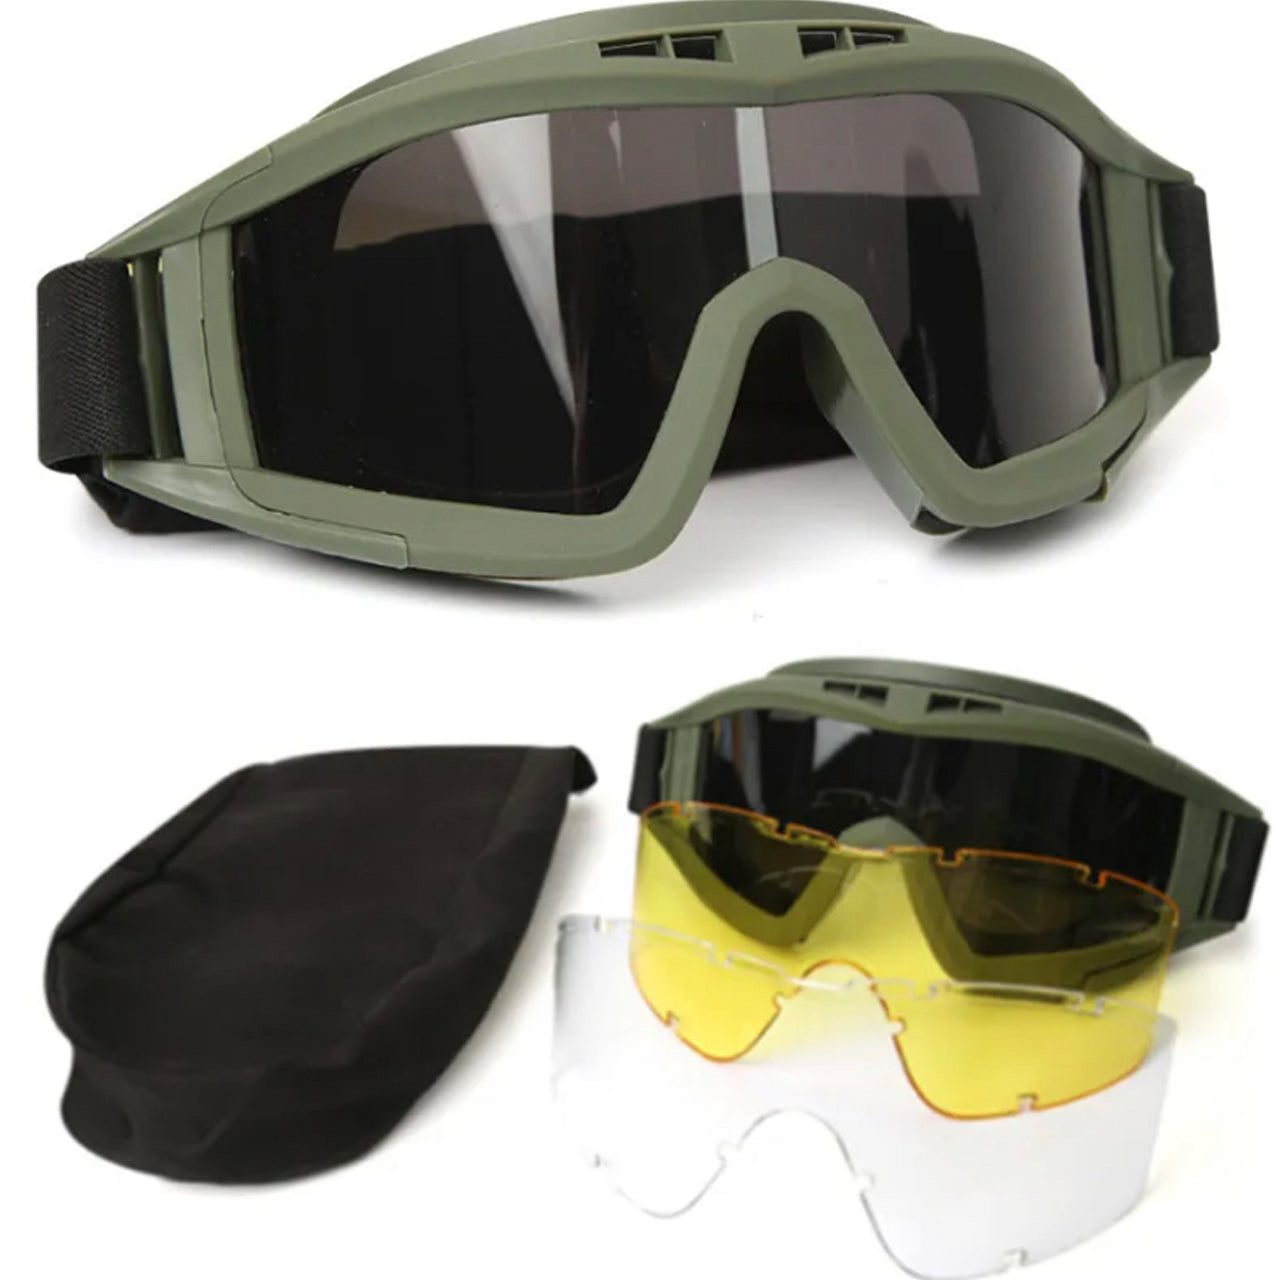 Tactical Military Goggle - Field Kit